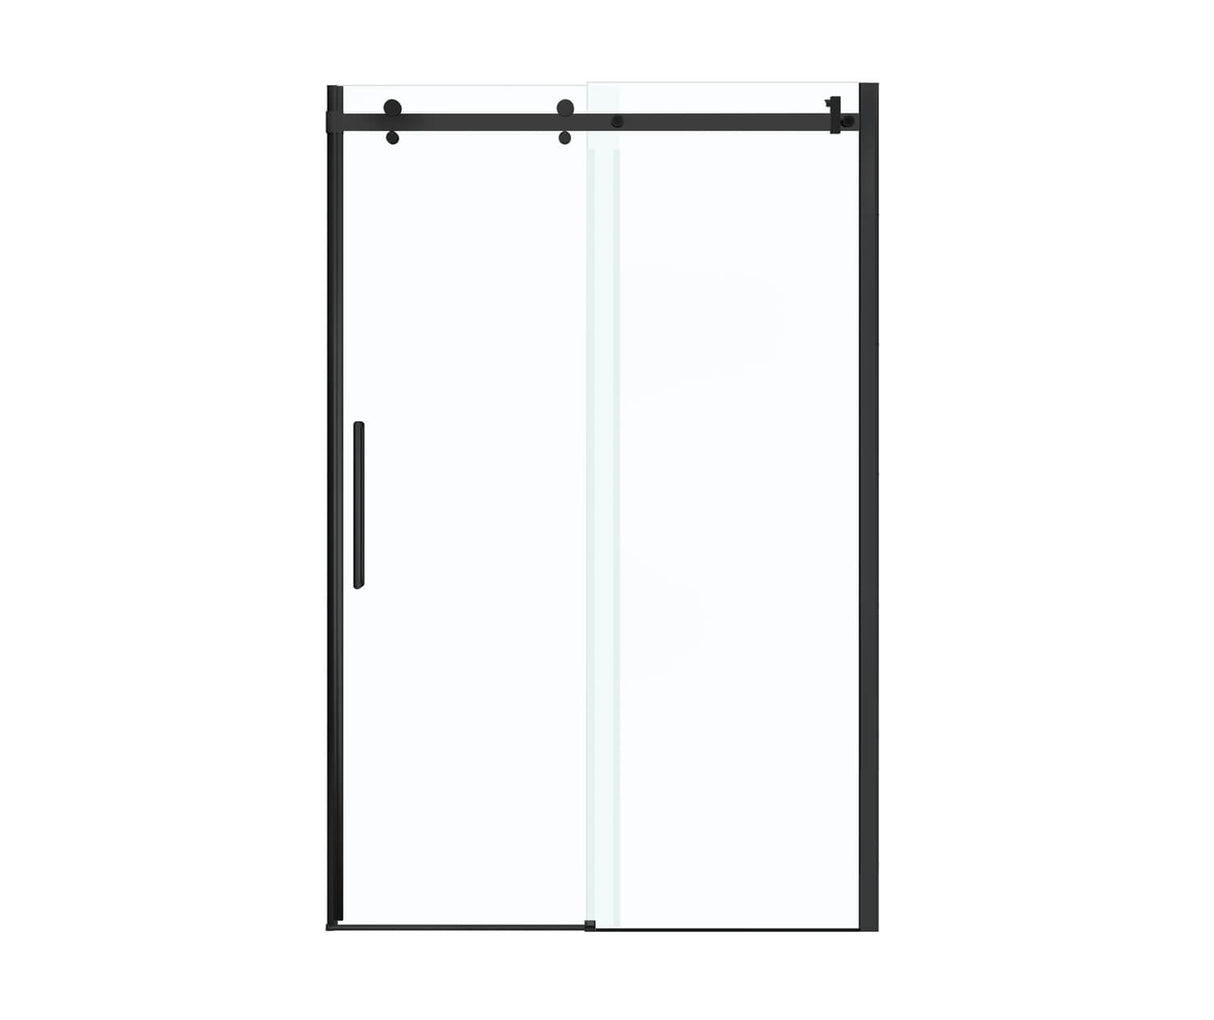 MAAX 138996-900-340-000 Halo 44 ½-47 x 78 ¾ in. 8mm Sliding Shower Door for Alcove Installation with Clear glass in Matte Black